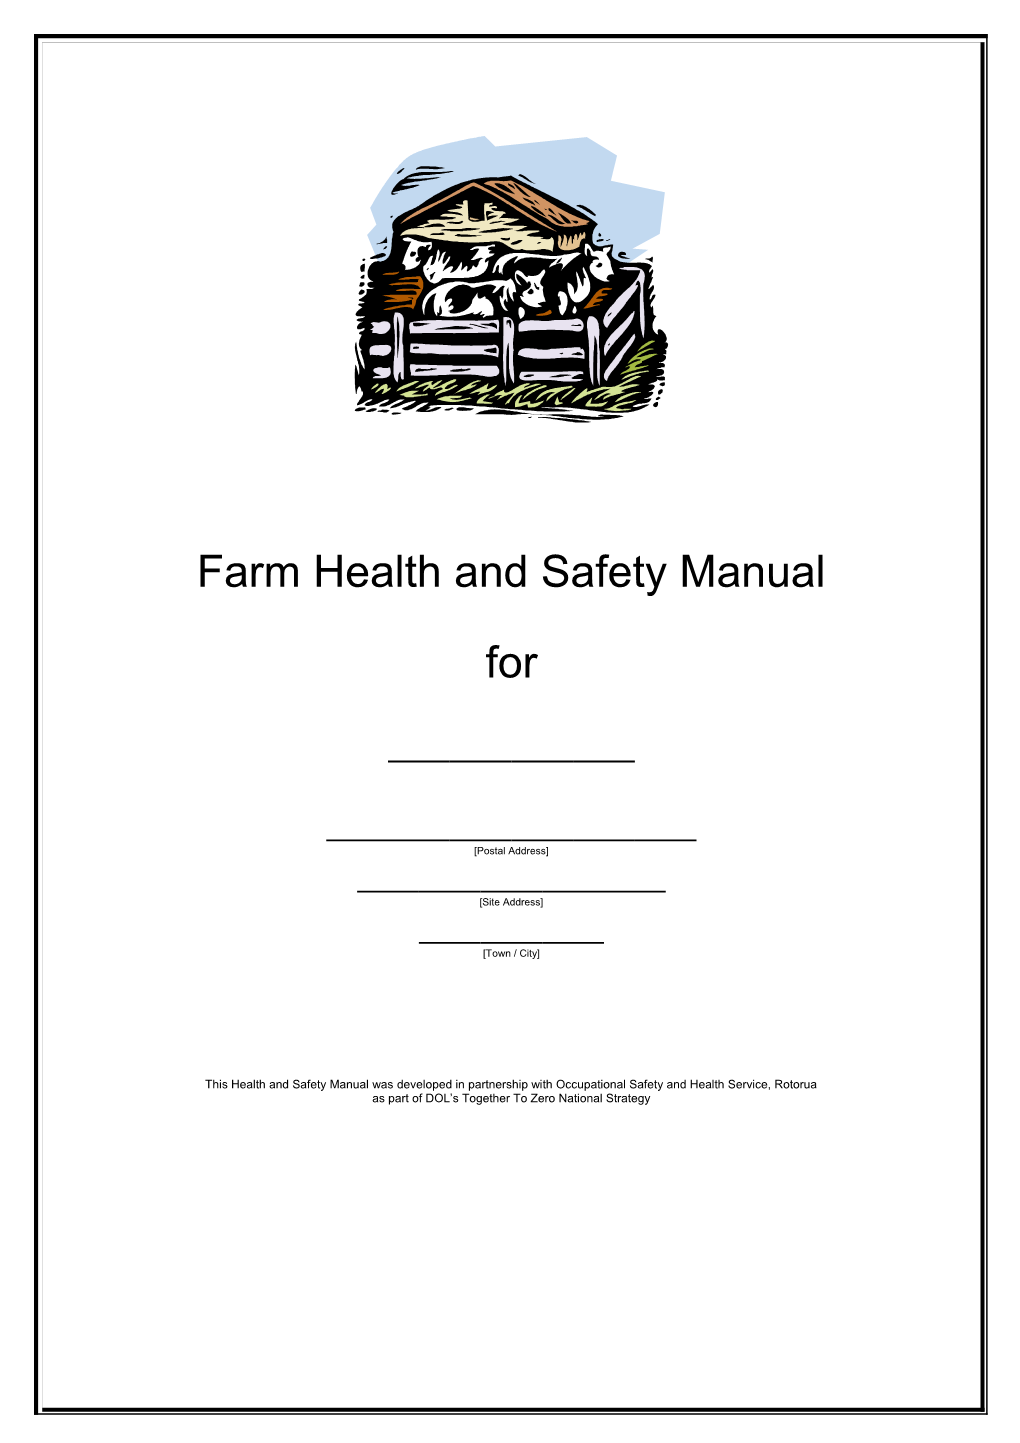 Health and Safety Manual